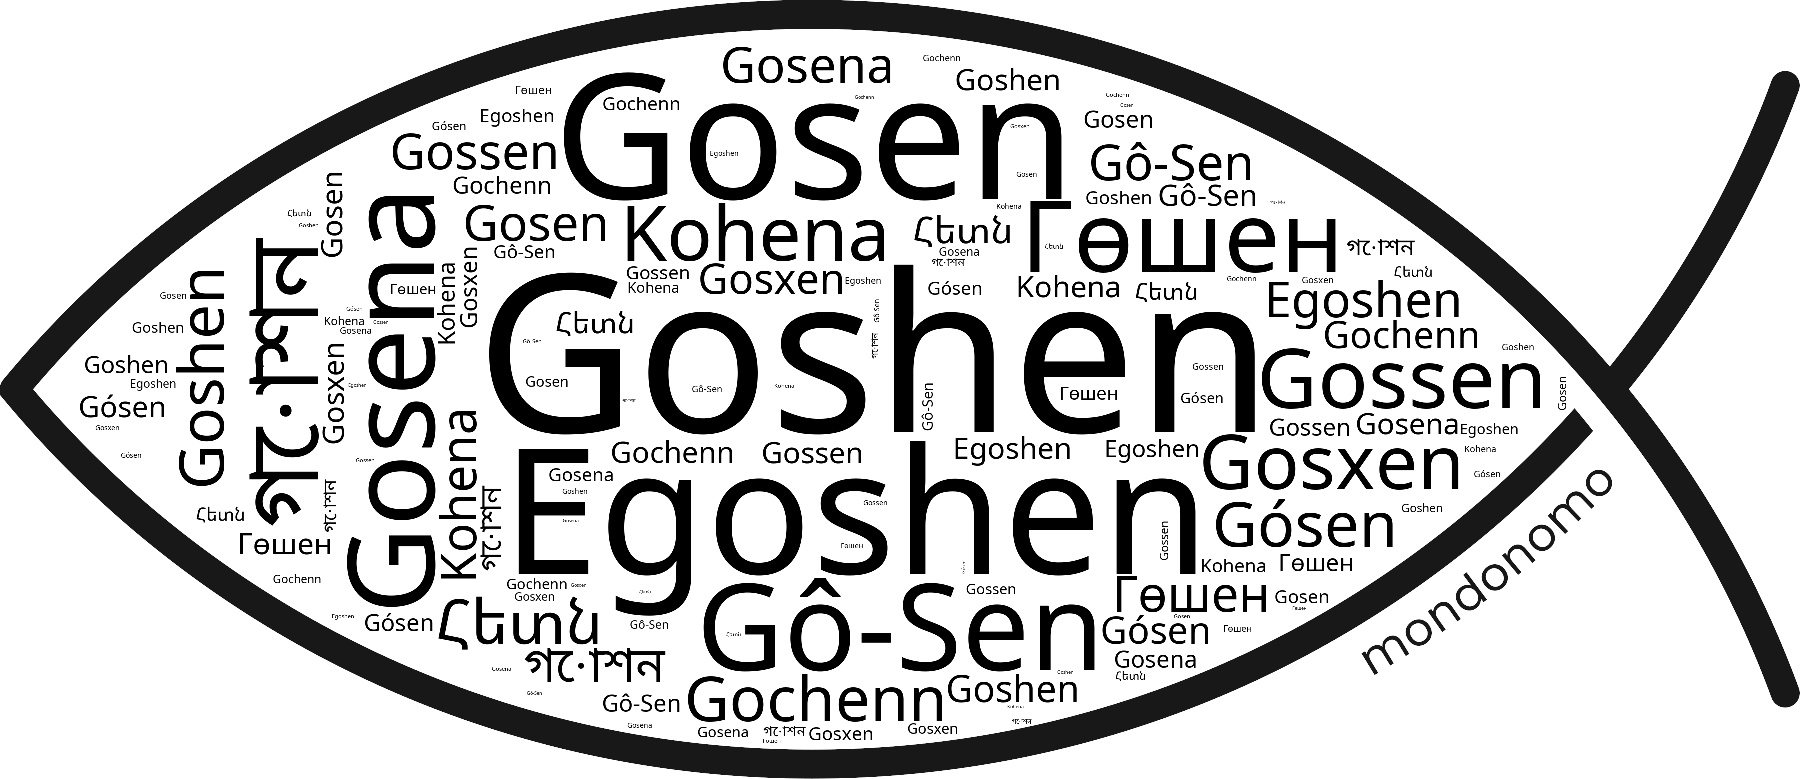 Name Goshen in the world's Bibles